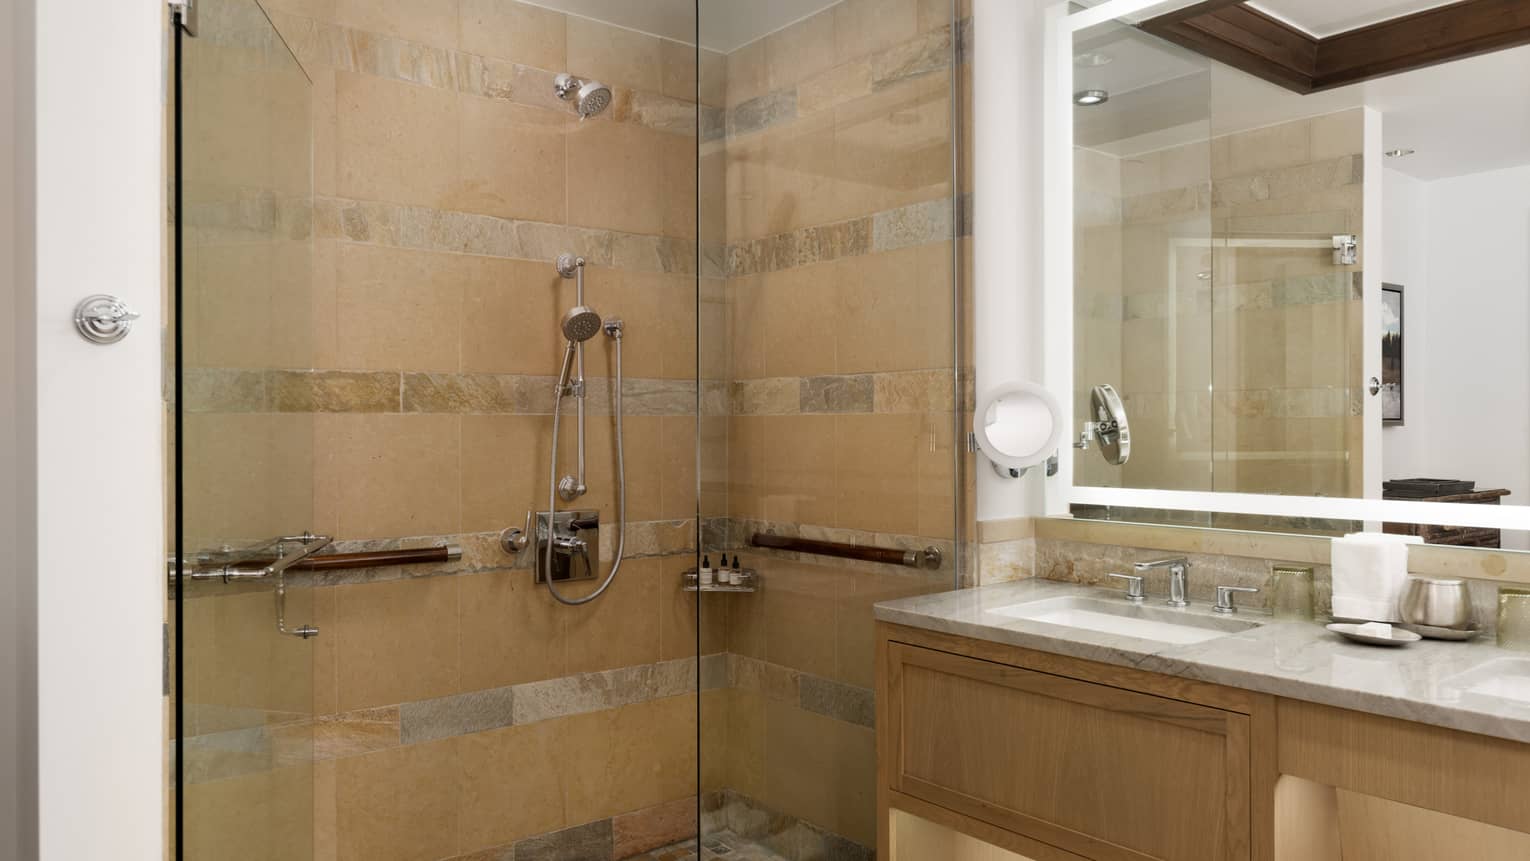 Bathroom with wheel-chair accessible glass shower